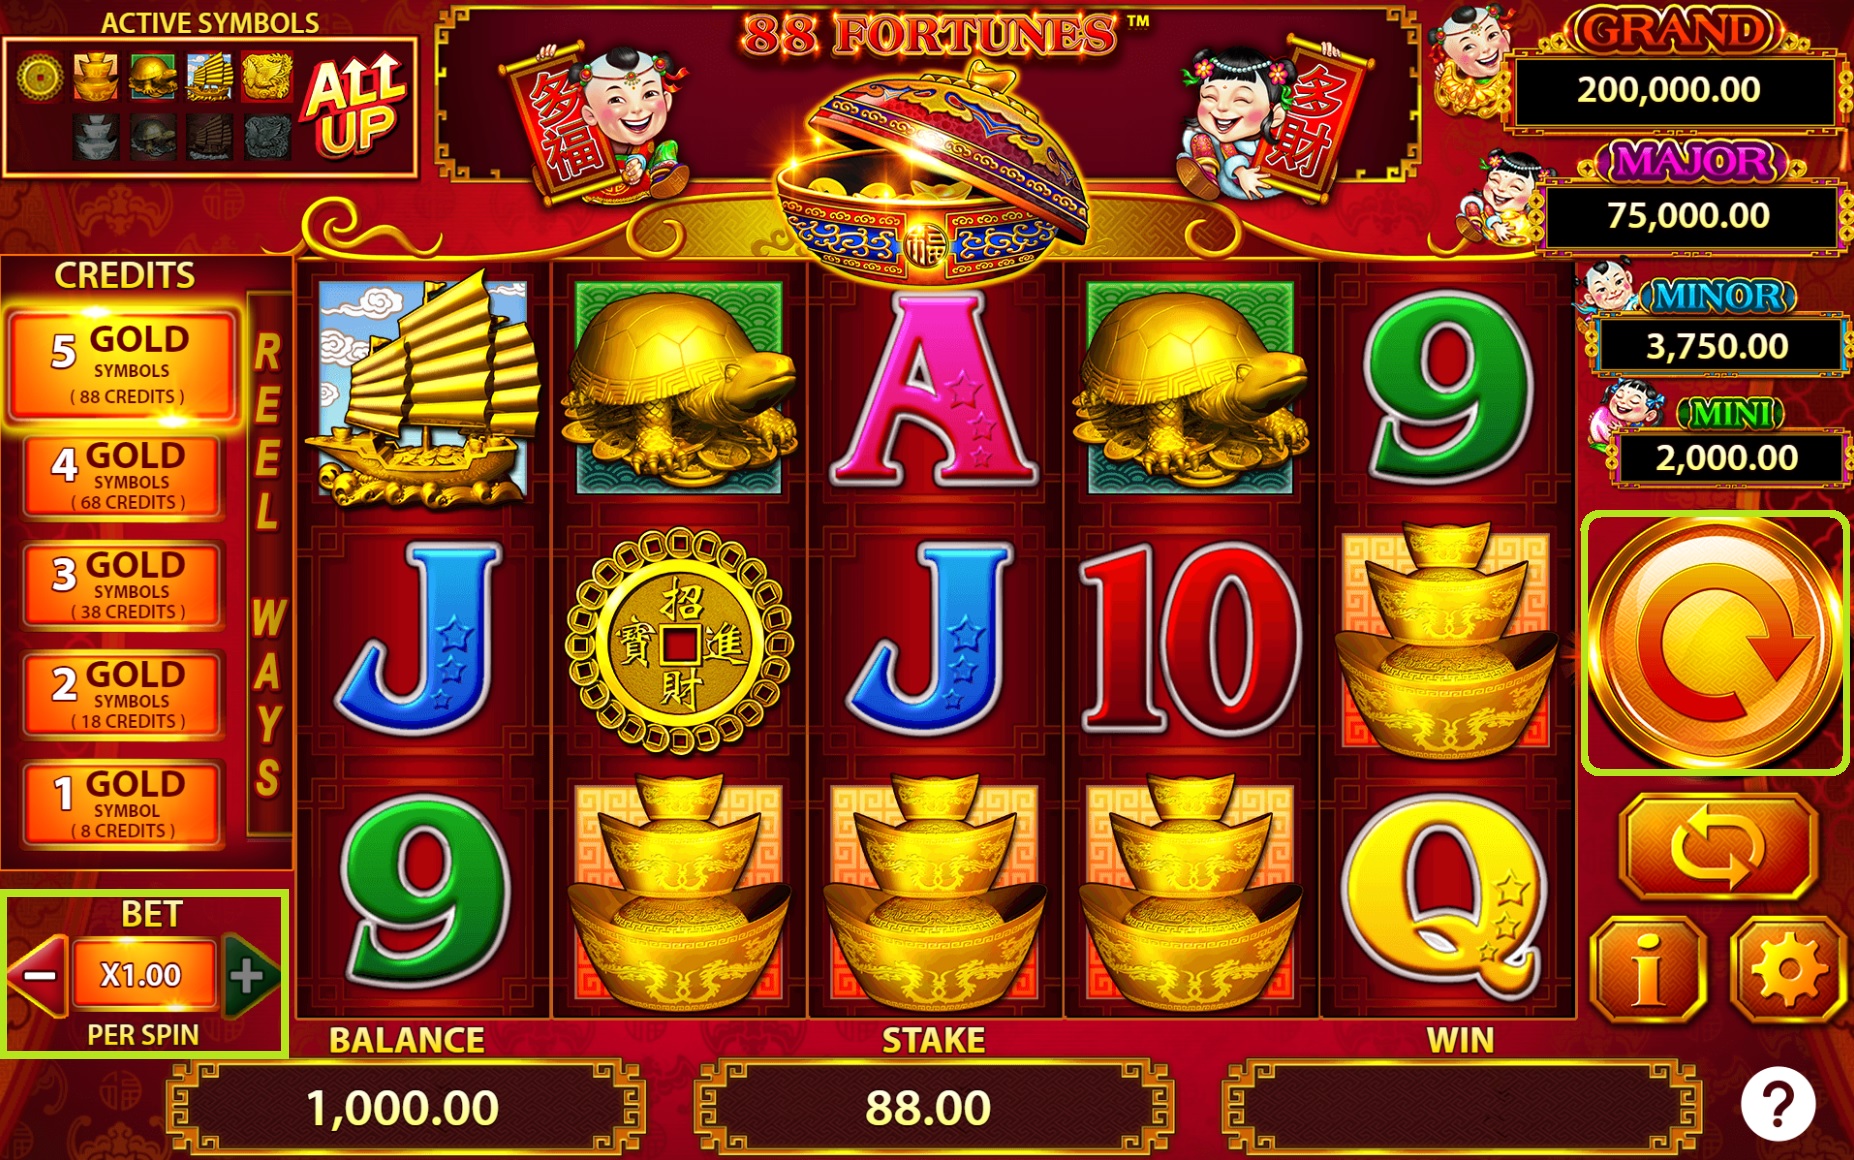 88 Fortune Slot Bets and Spin